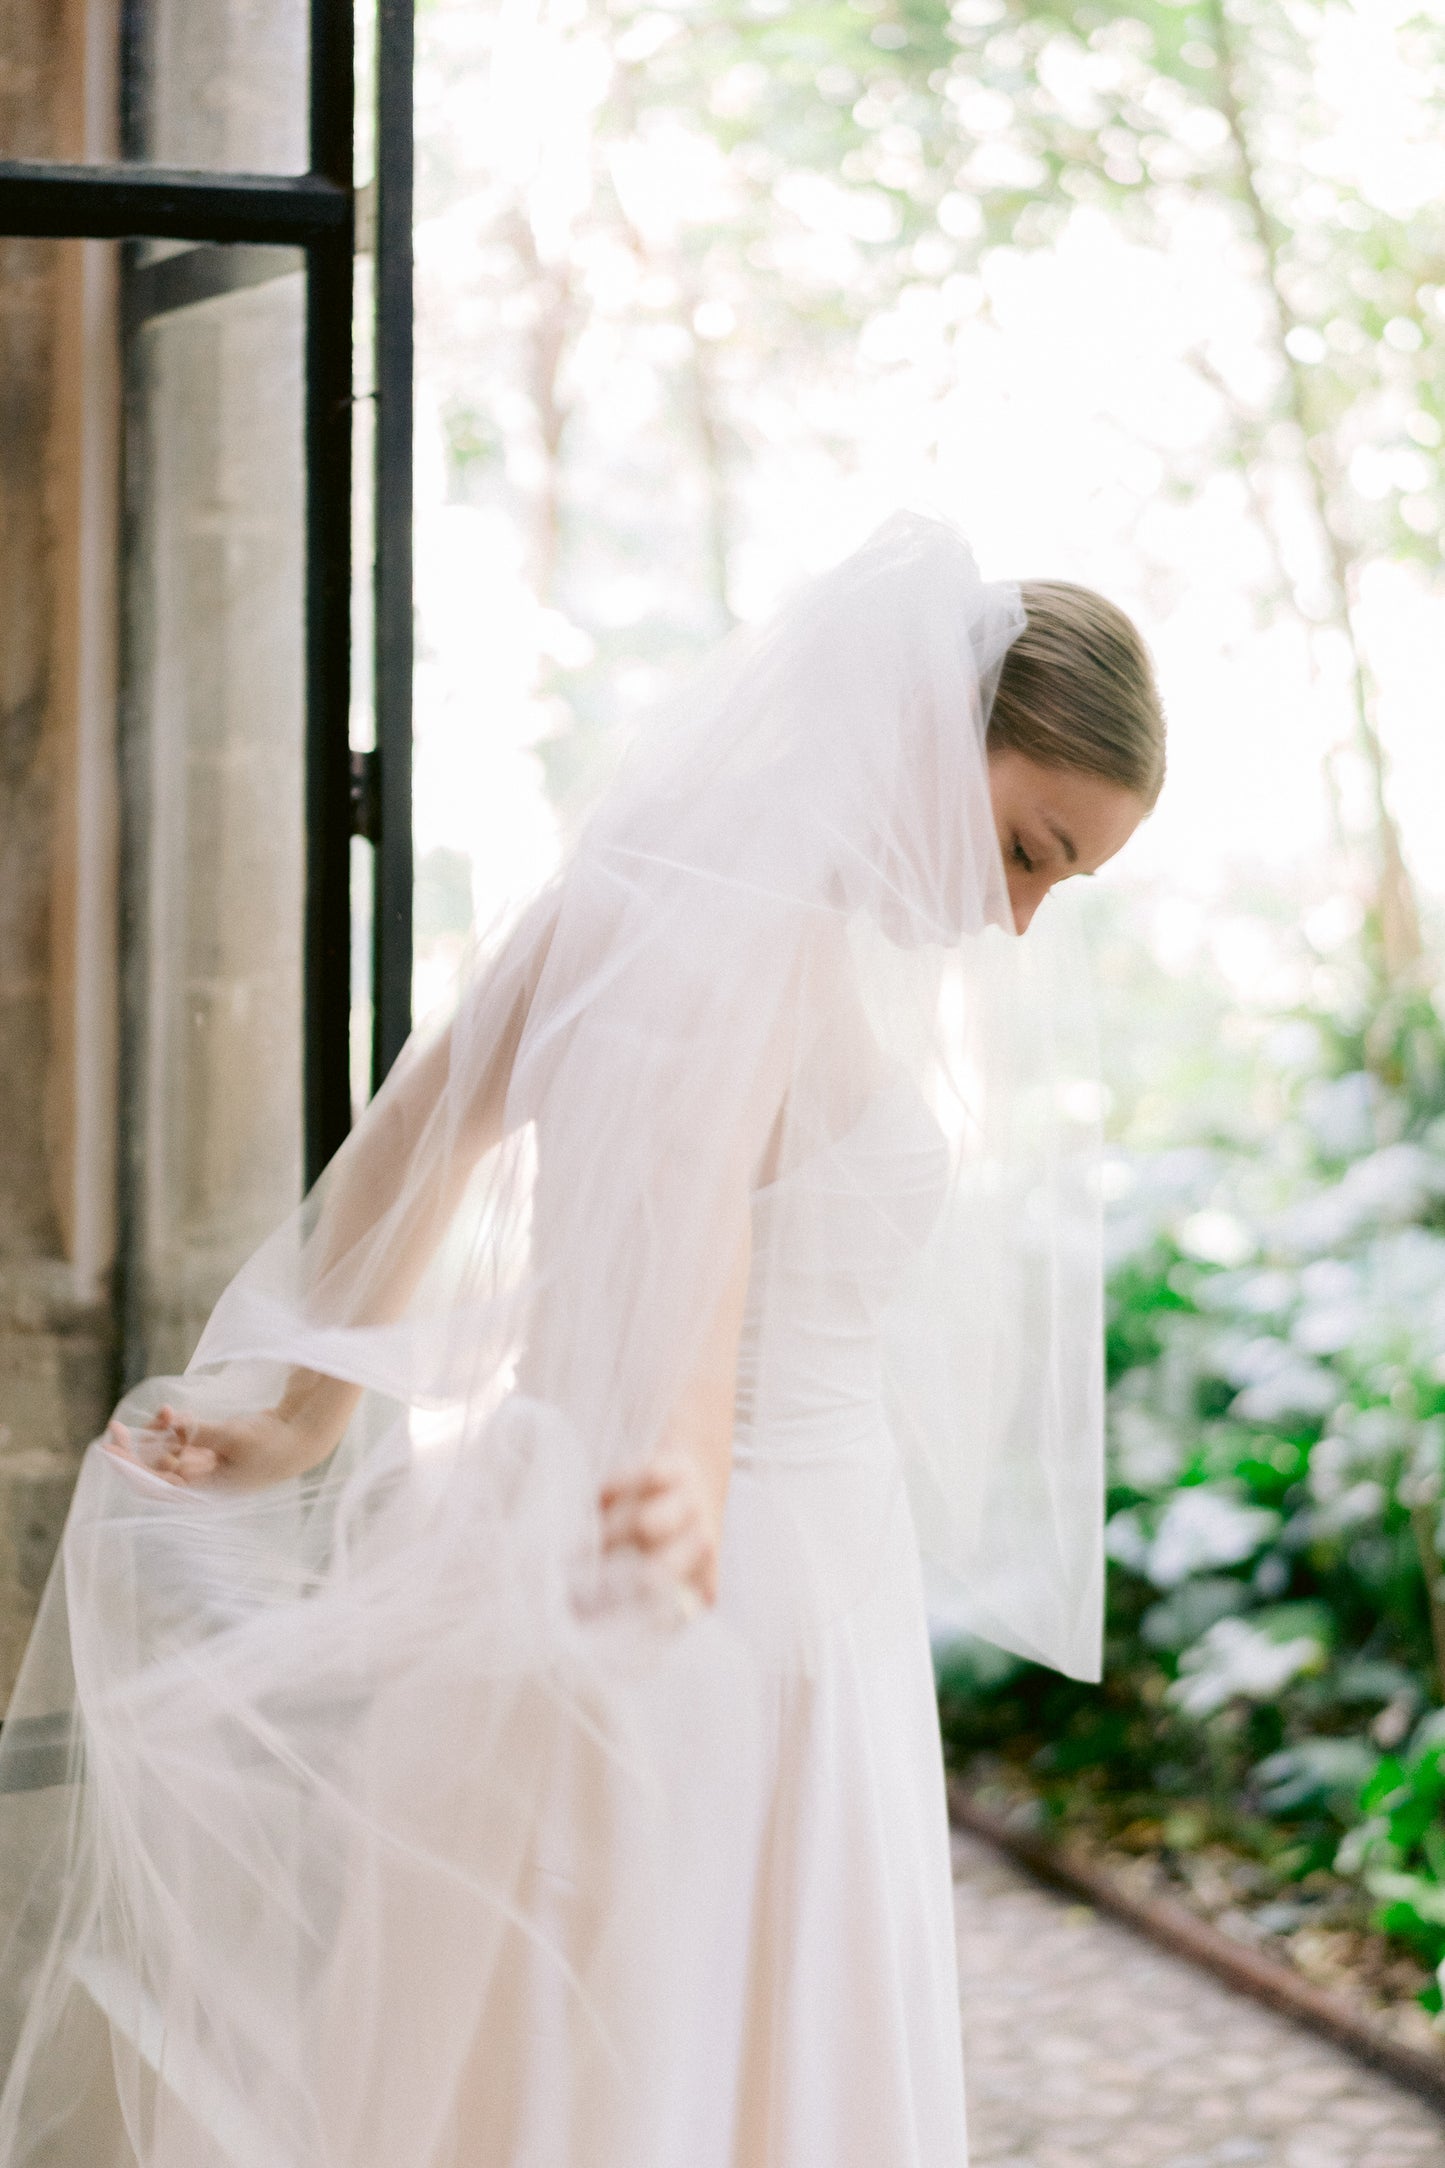 timeless elegant long wedding veil with simple raw edge over bride's chic updo